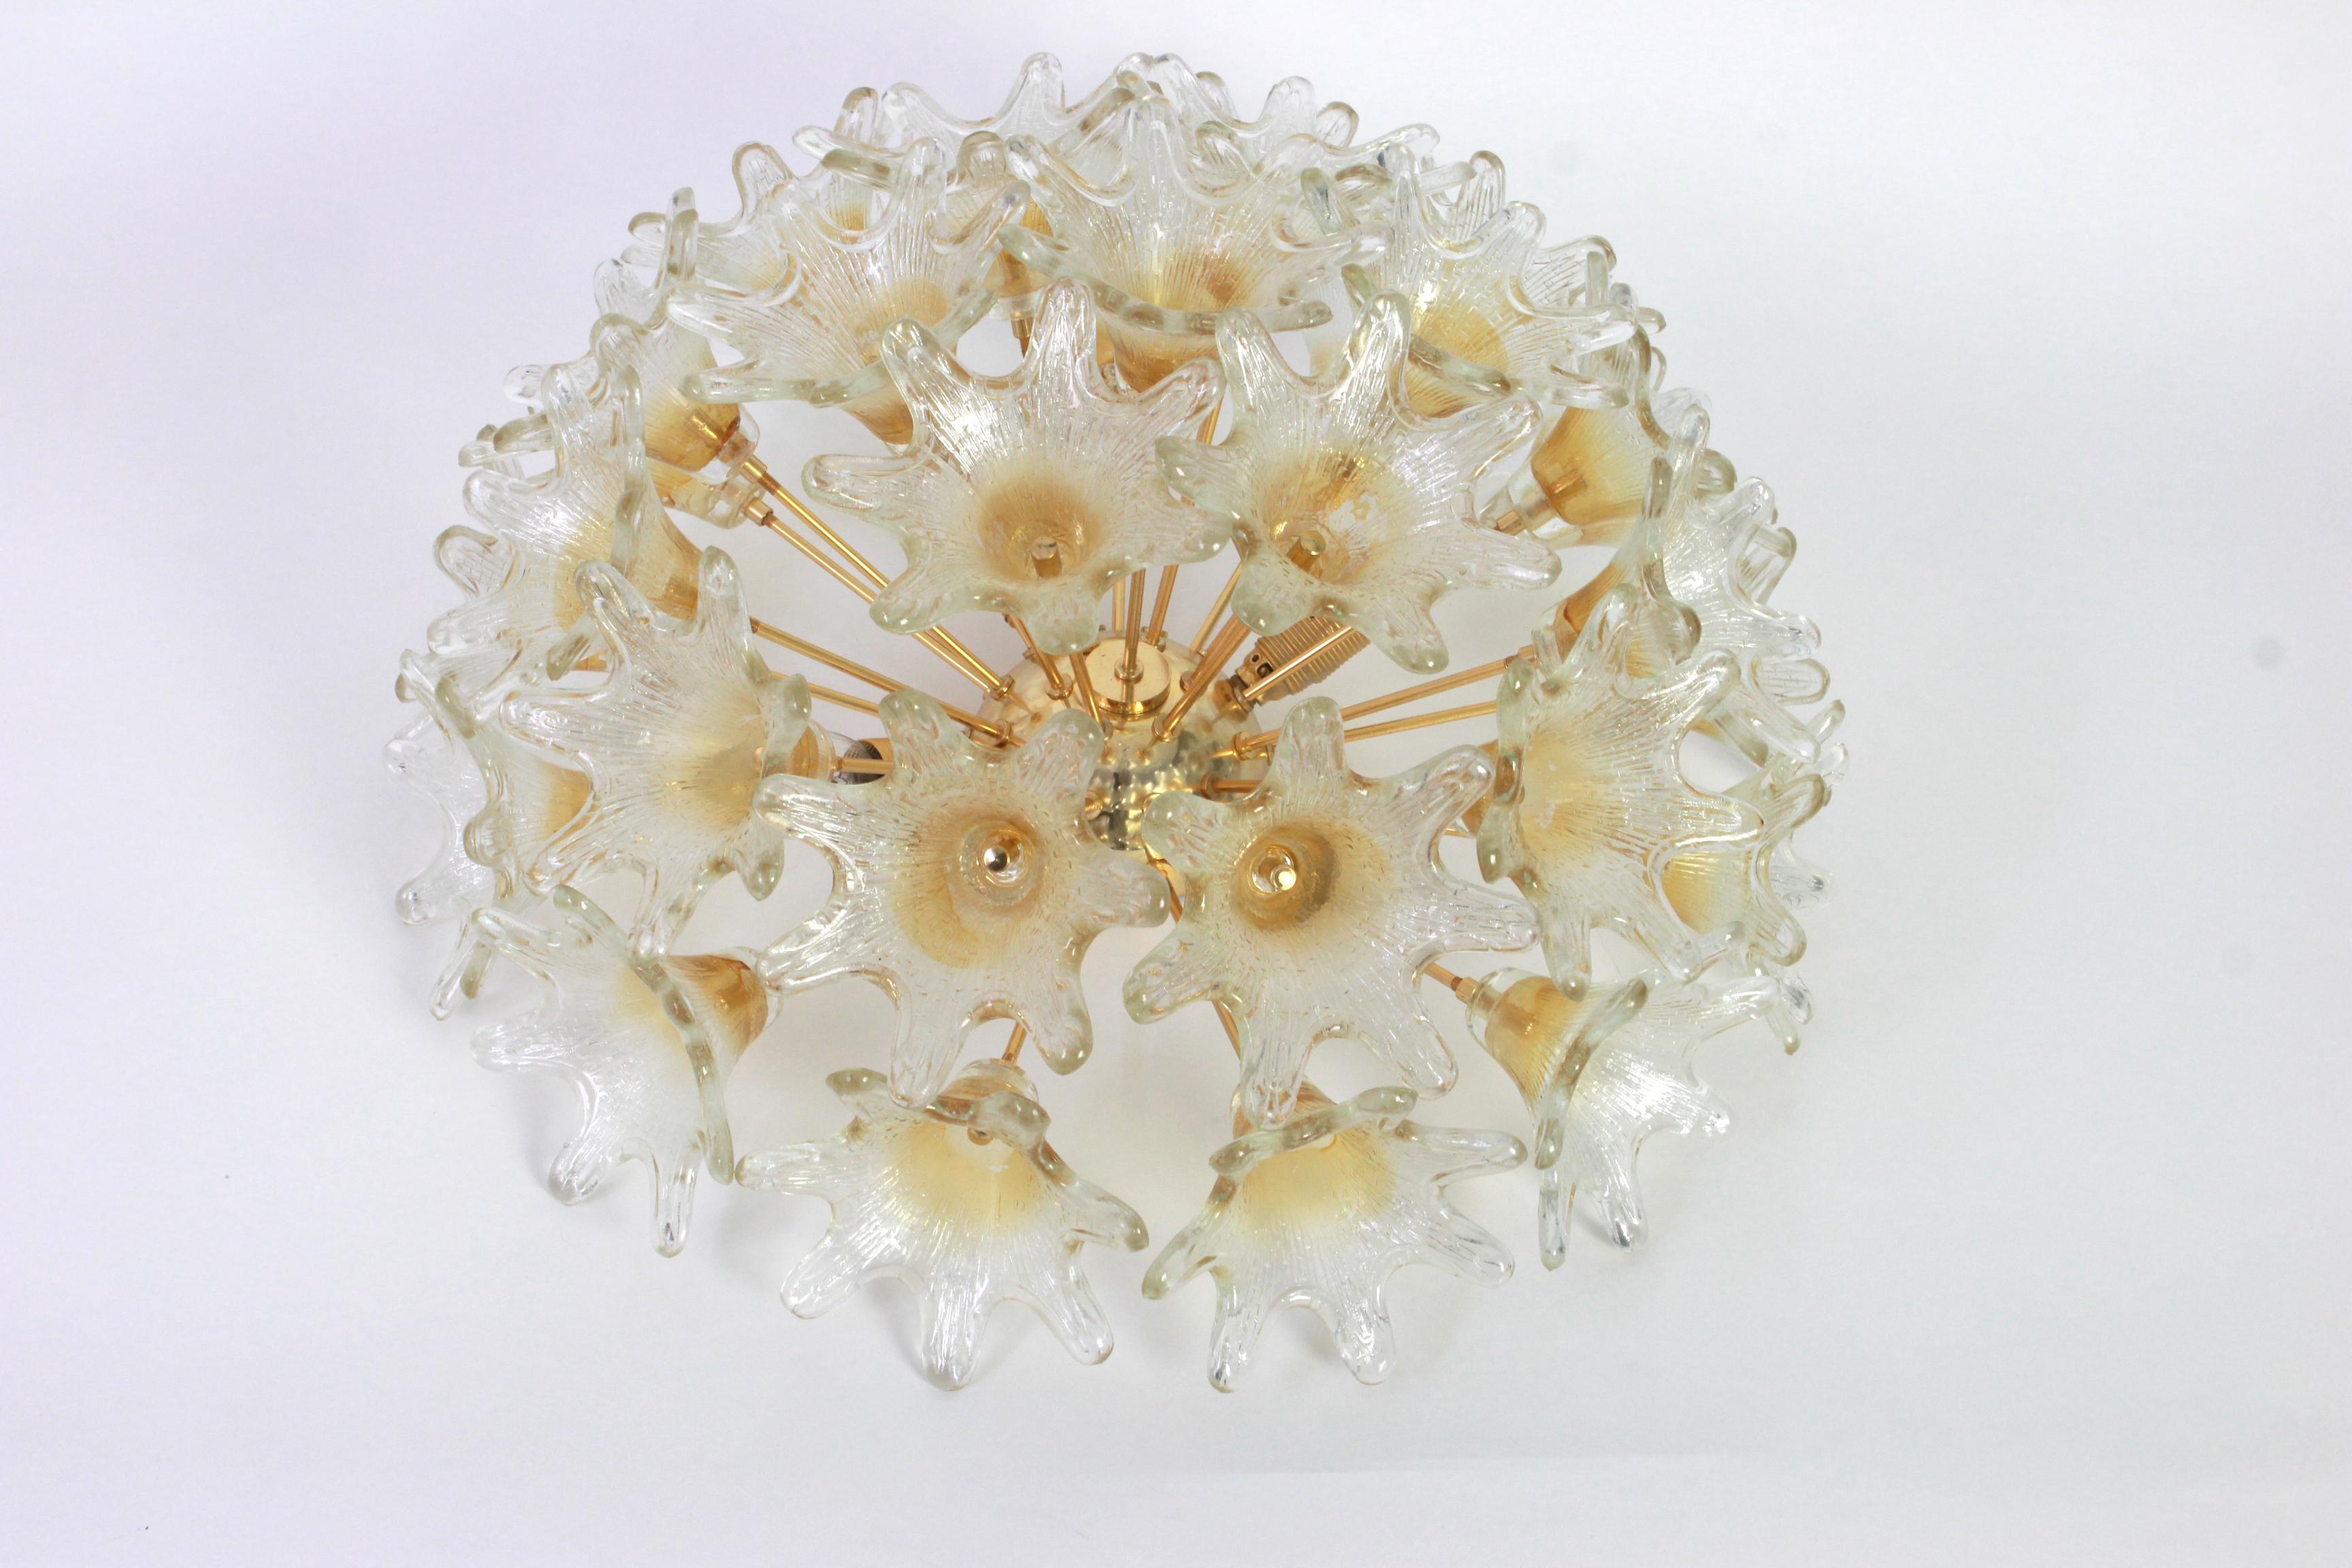 Spectacular Murano glass and brass sunburst flower flush mount by Venini for VeArt, Italy 1970s
Stunning shape and great light effect.
All glasses are in good condition.
It needs 4 small size bulbs (E-14 bulbs) up to 40 watts each and is